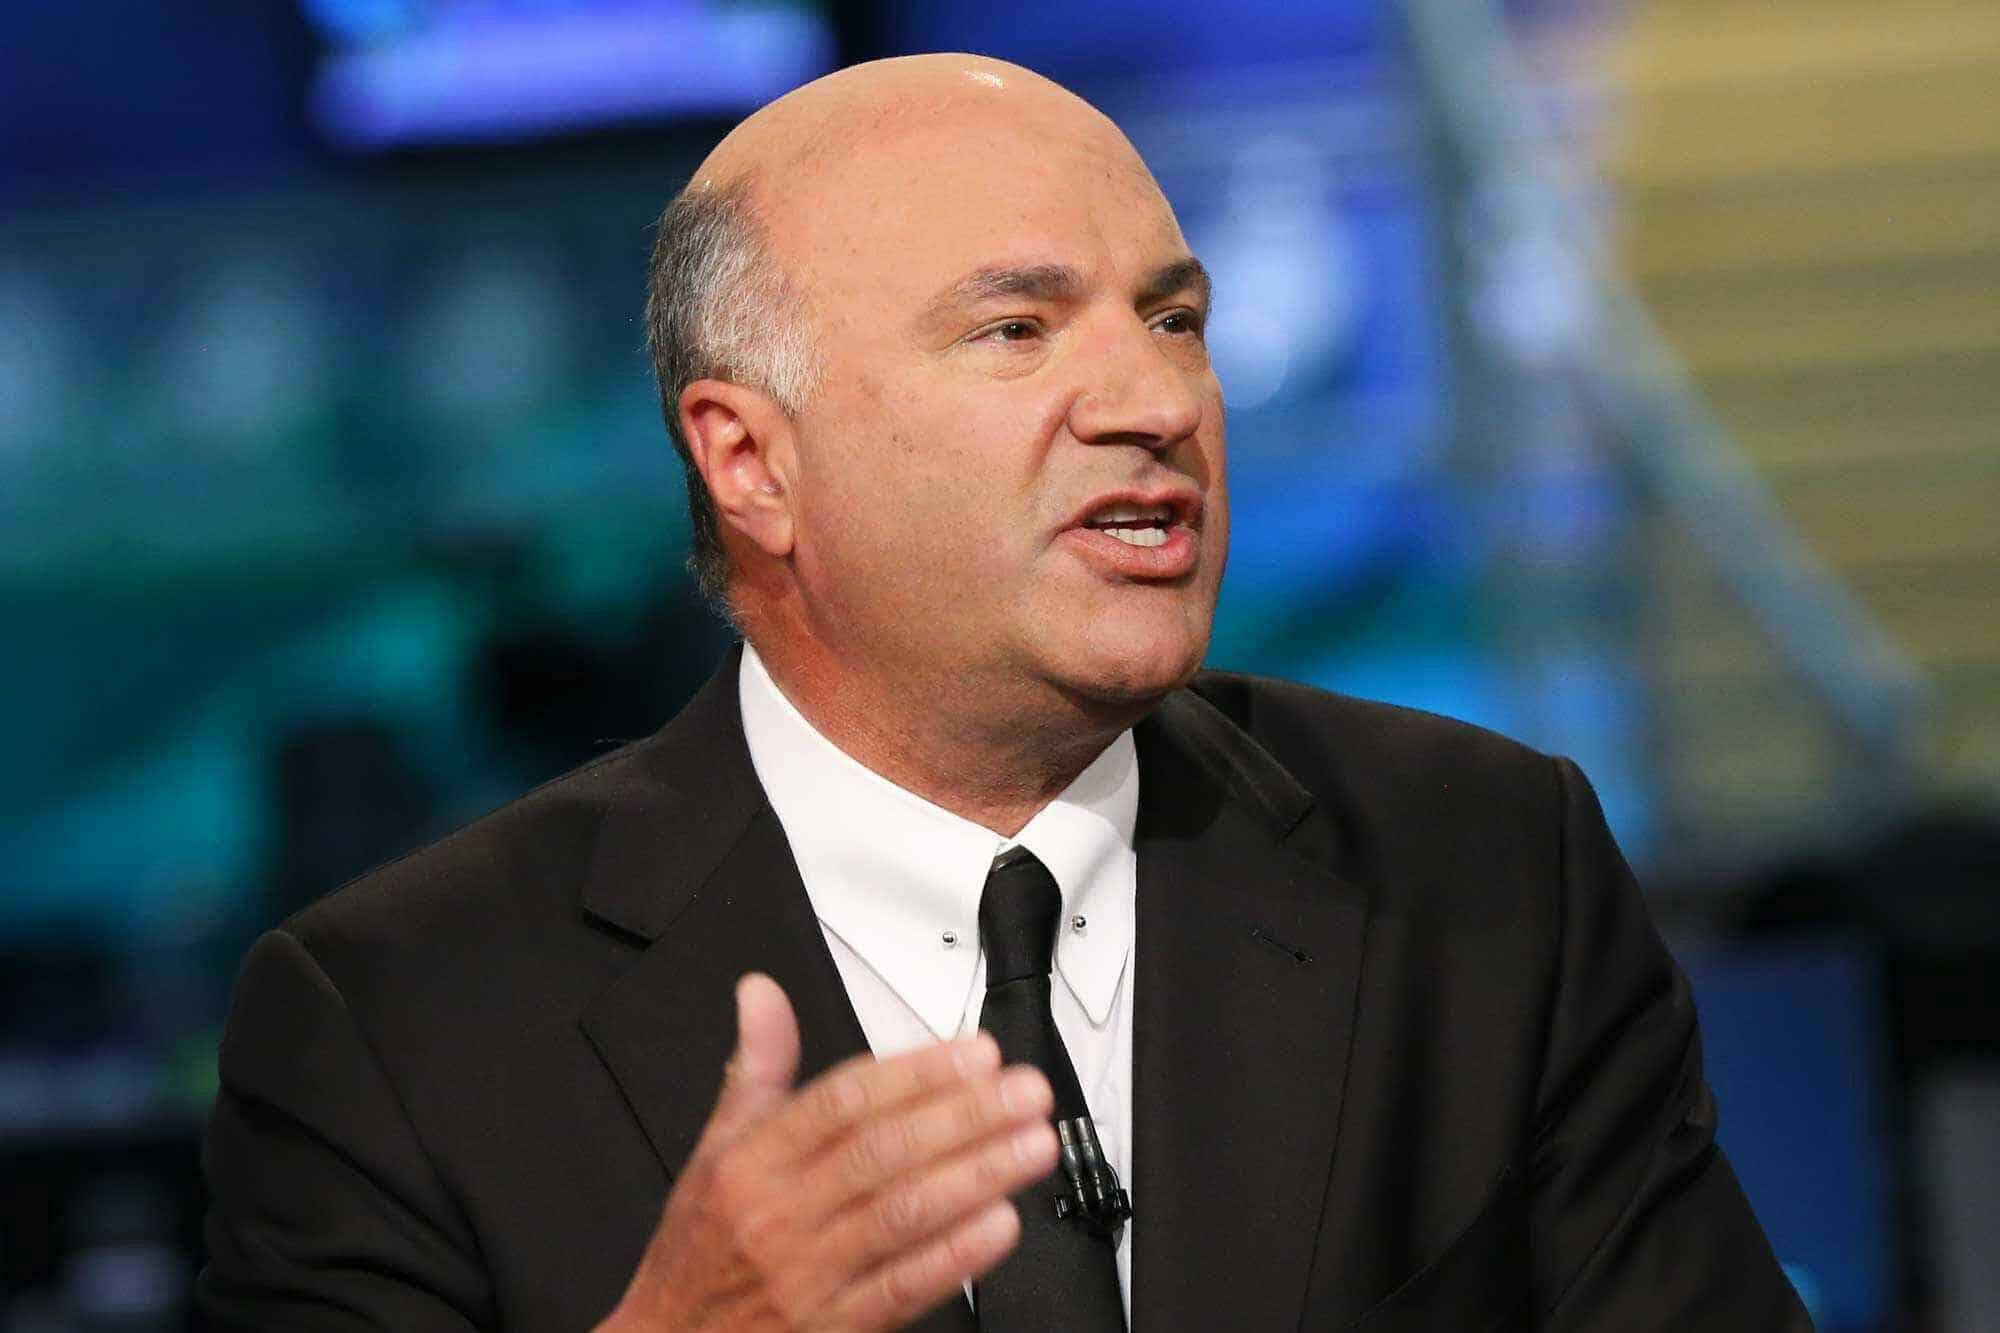 Kevin O’Leary Says Binance Could Lose Half of its Customers to Abu Dhabi's M2 Exchange